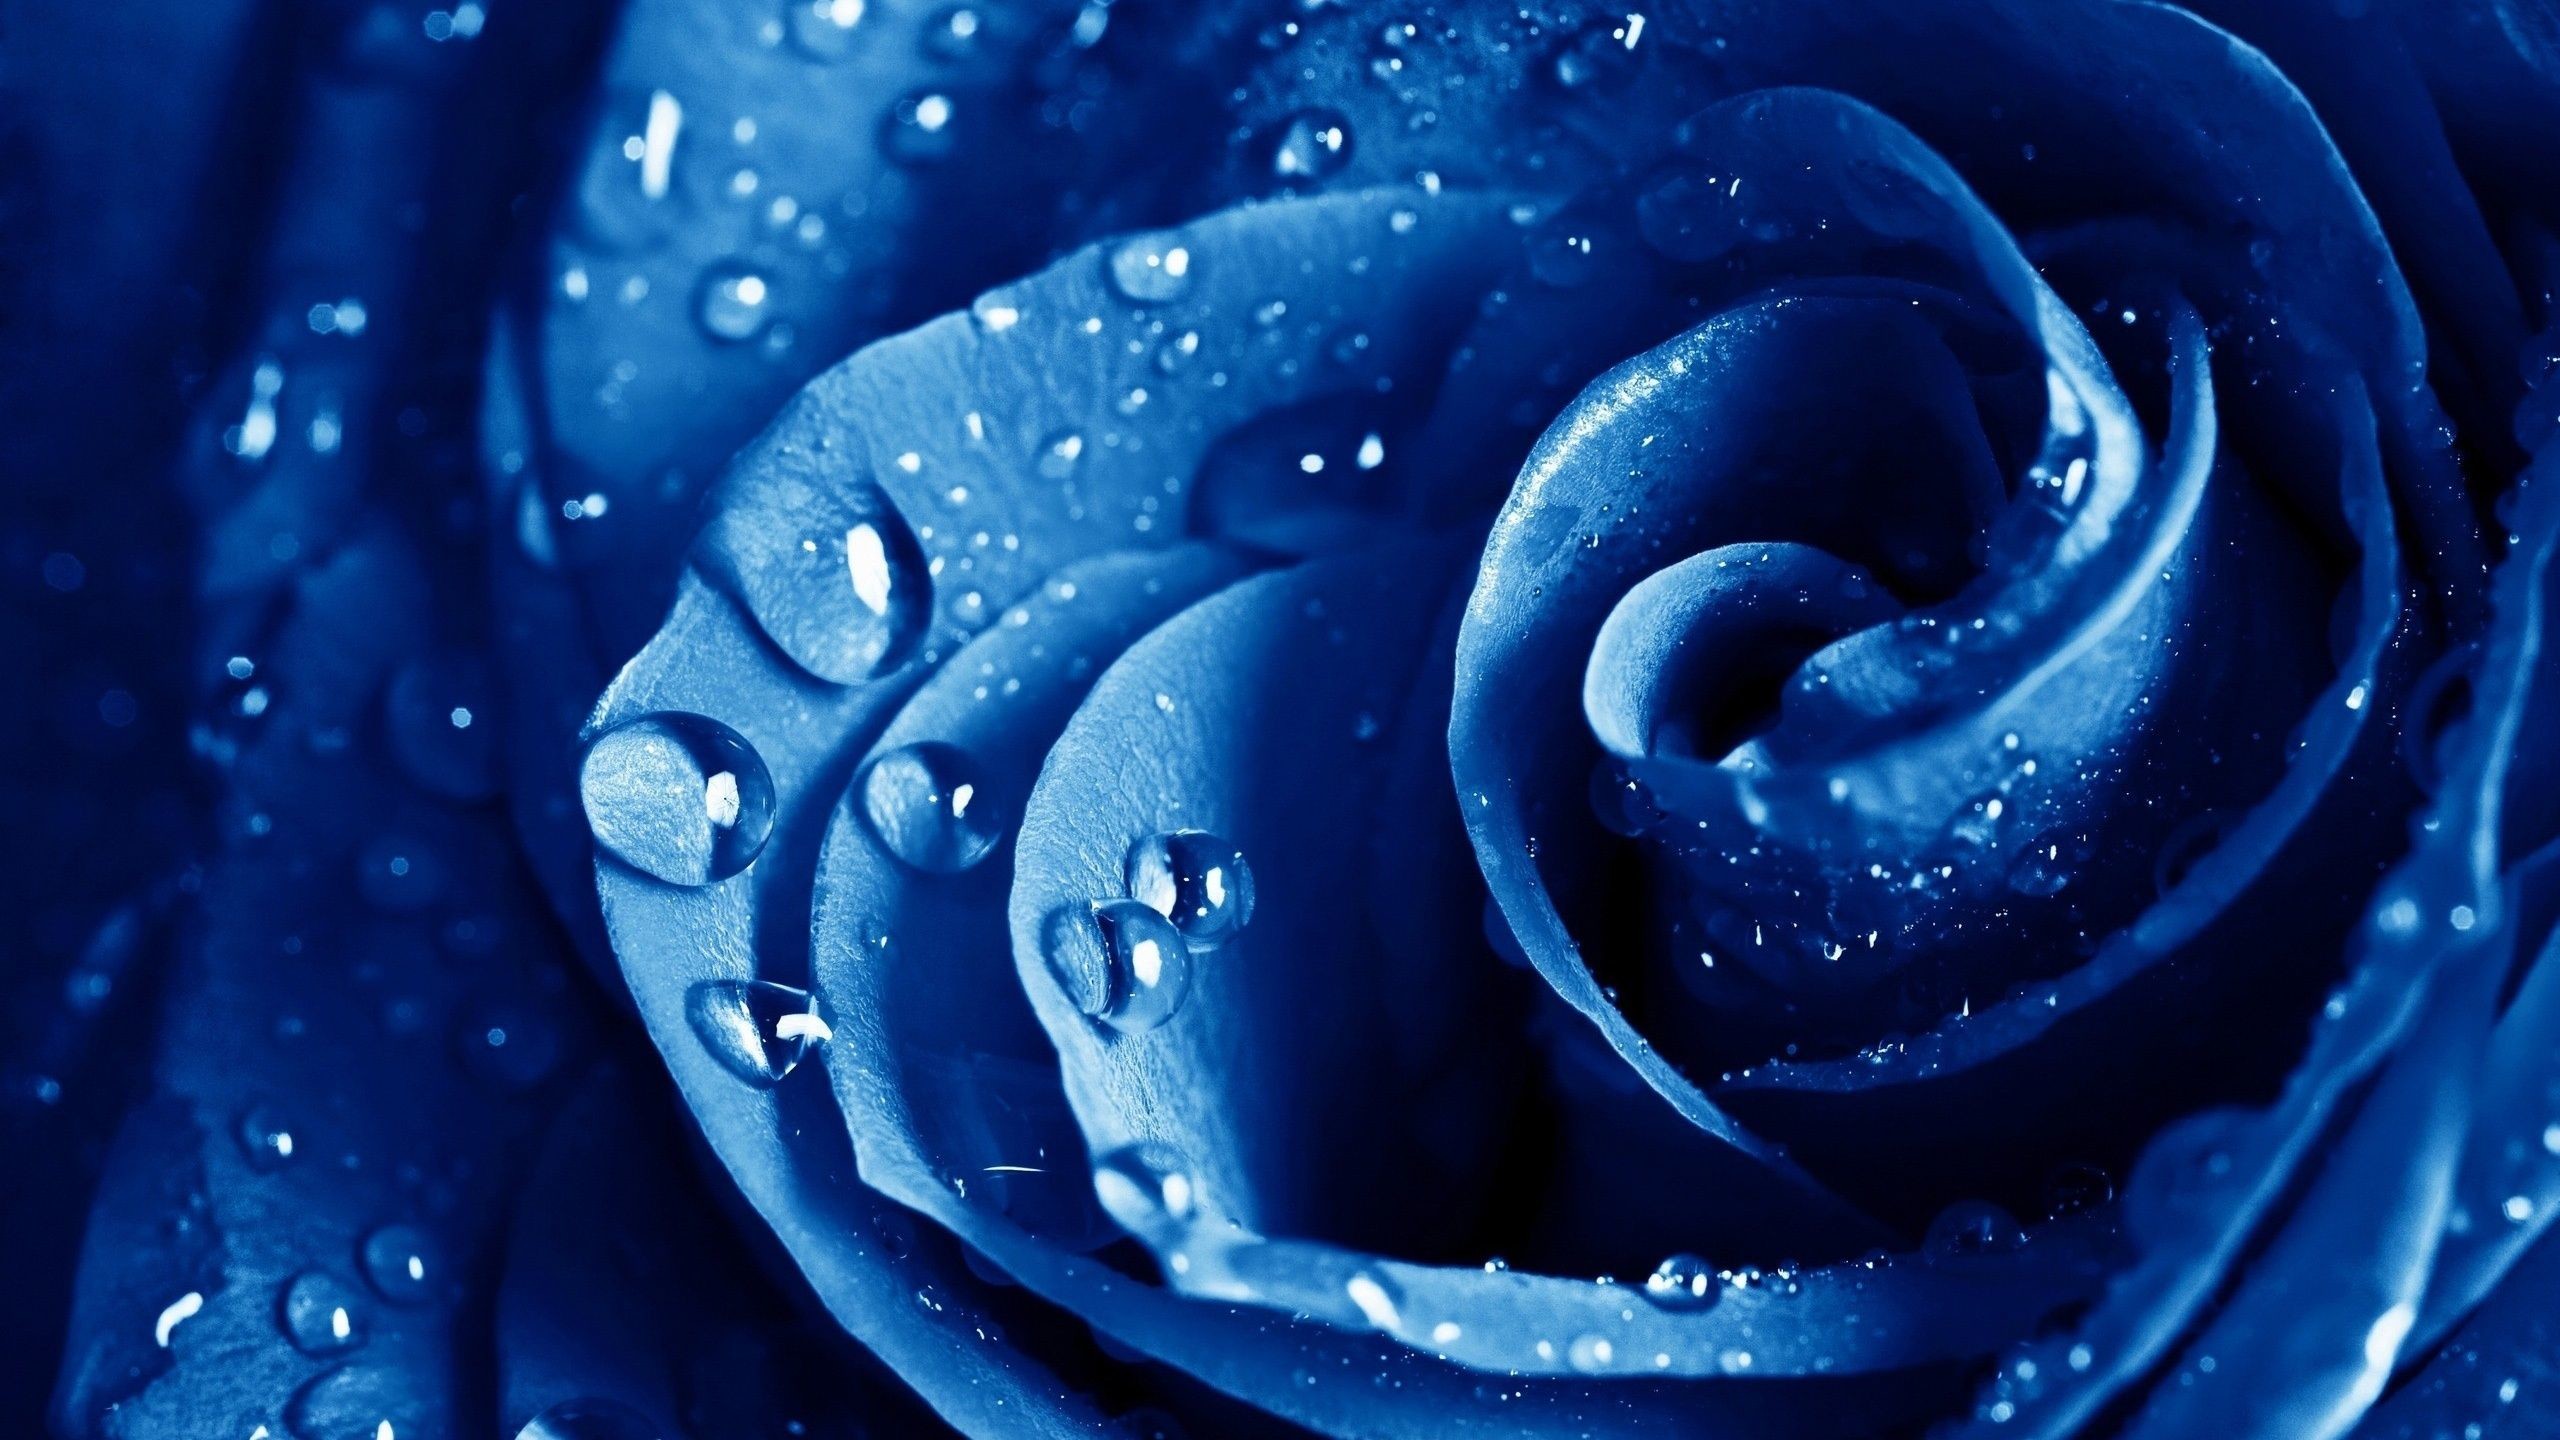 2560x1440 Blue Wallpapers 21 - Best Wallpaper Collection